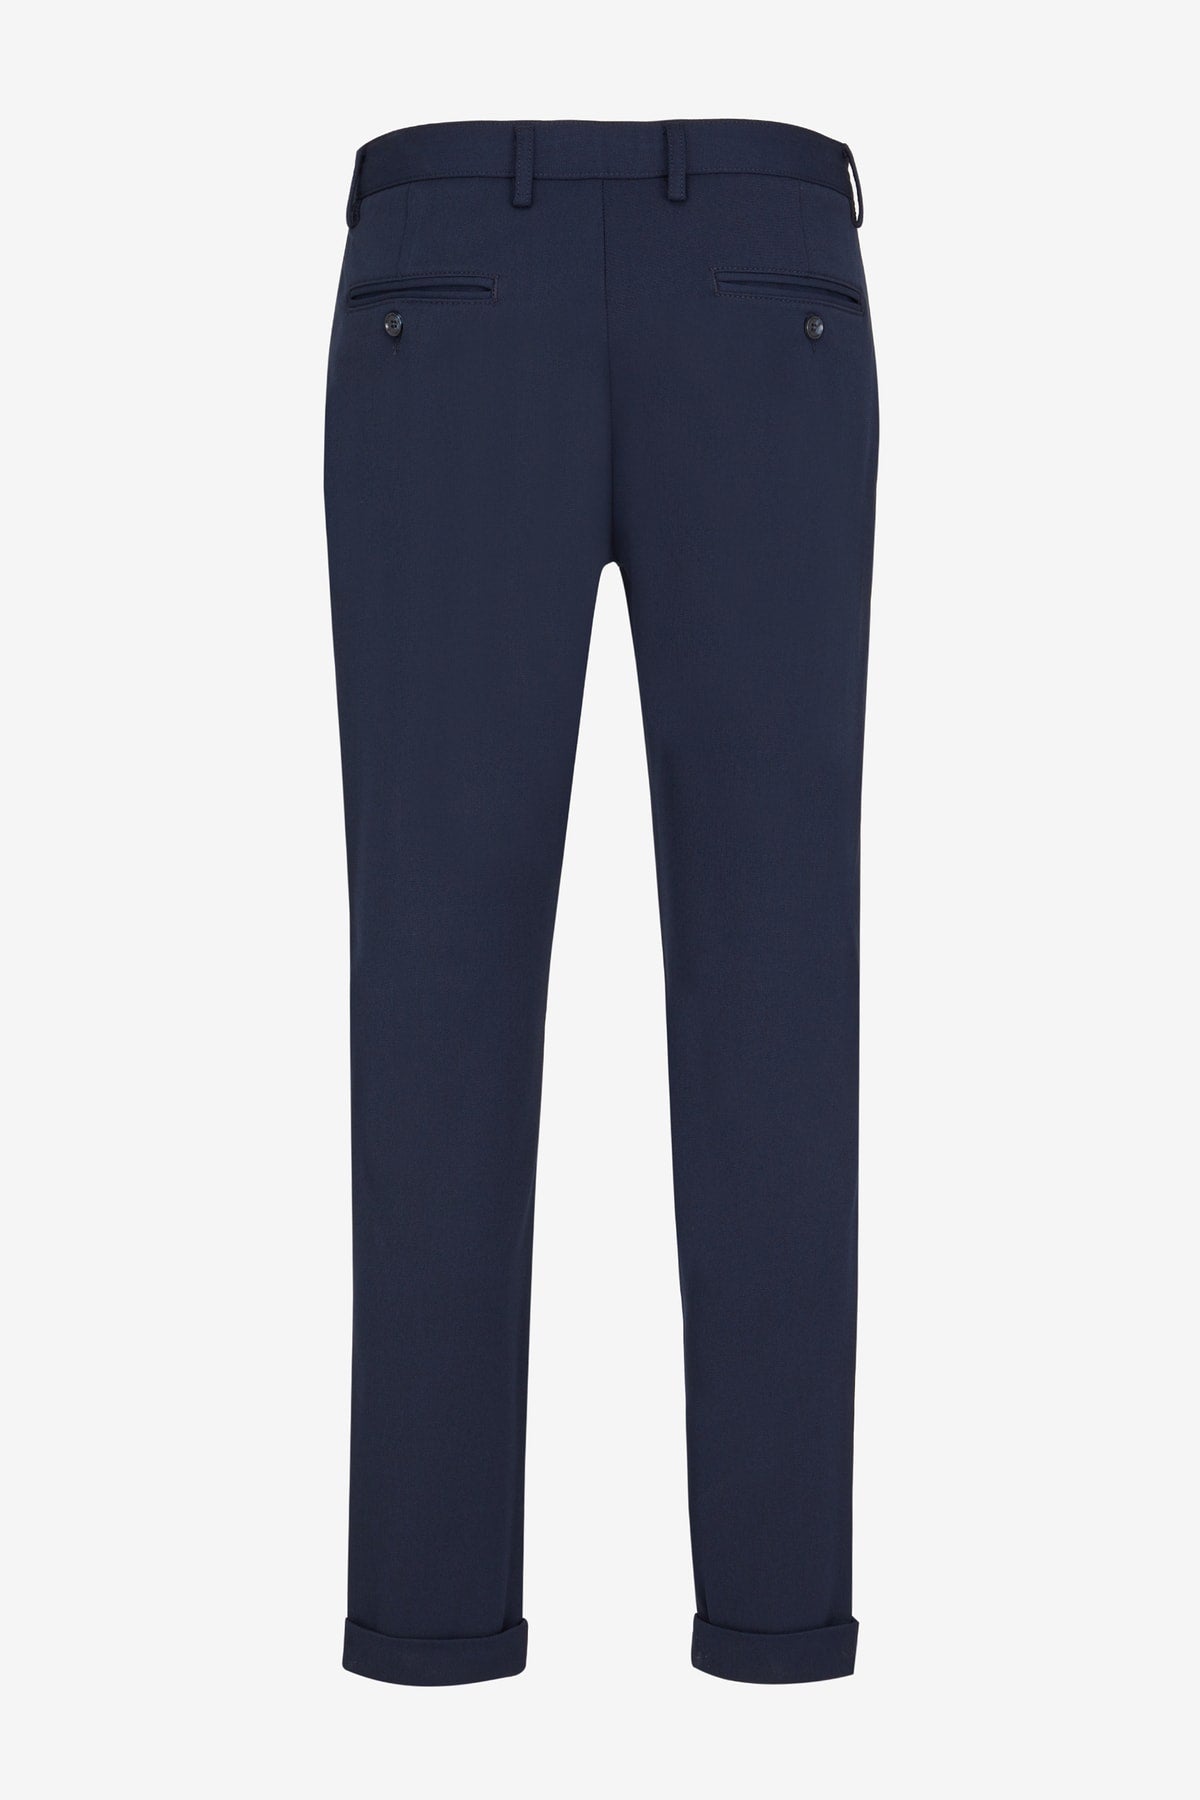 Dark Navy Blue Chino Lace-up Sport Trousers